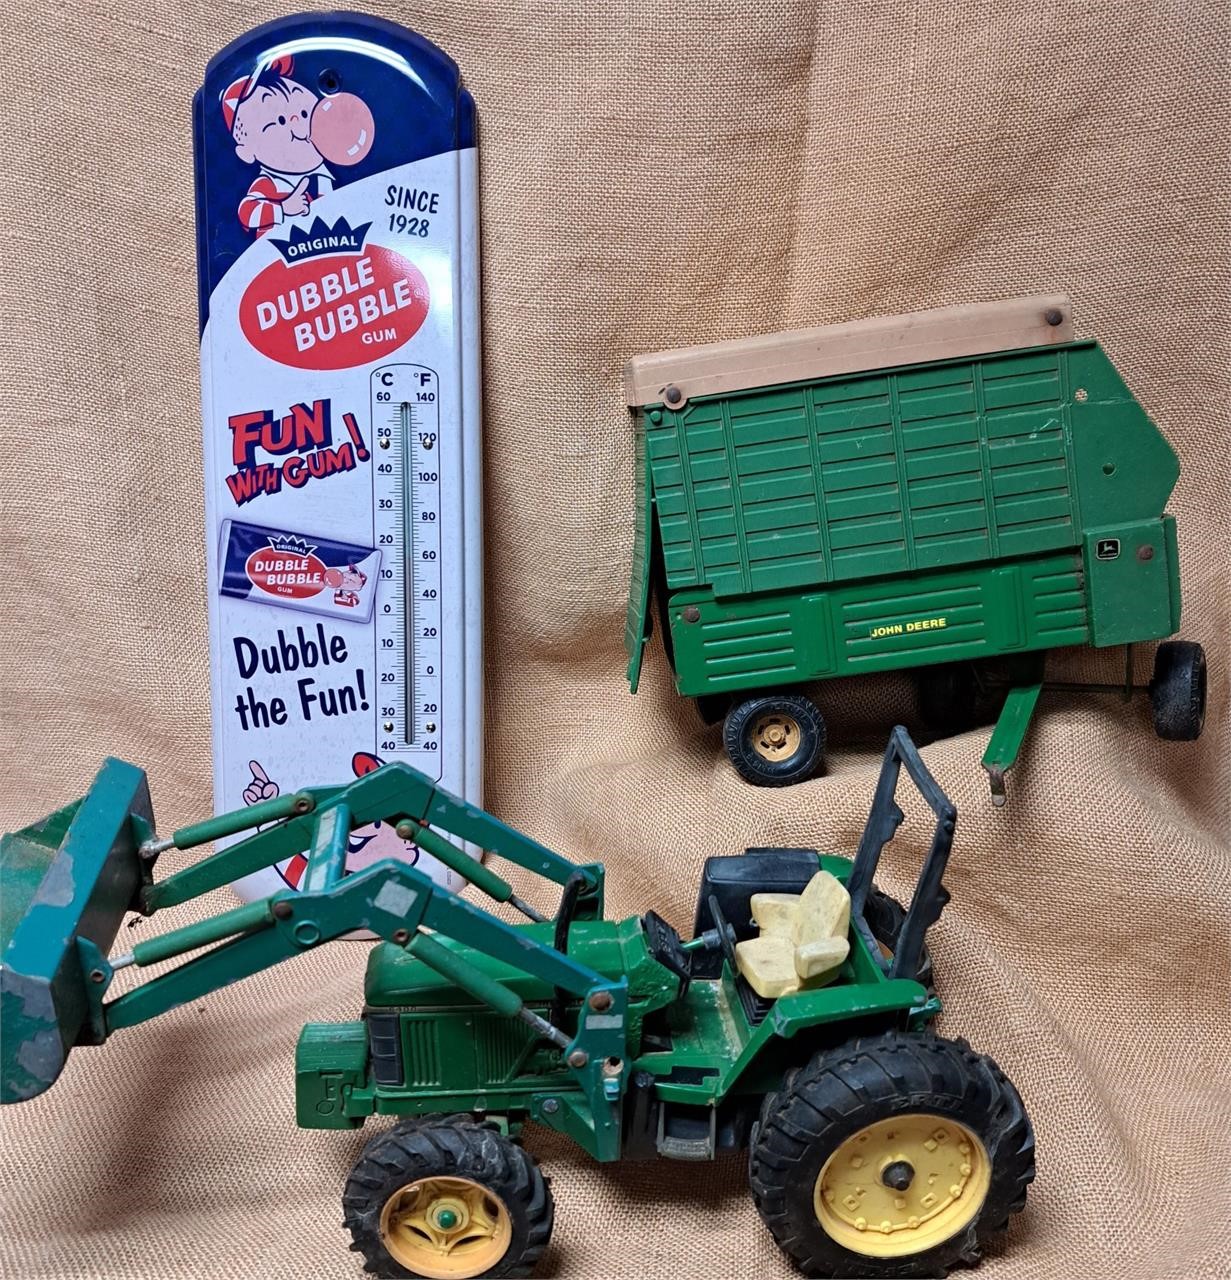 DOUBLE BUBBLE THERMOMETER & JOHN DEERE TRACTOR